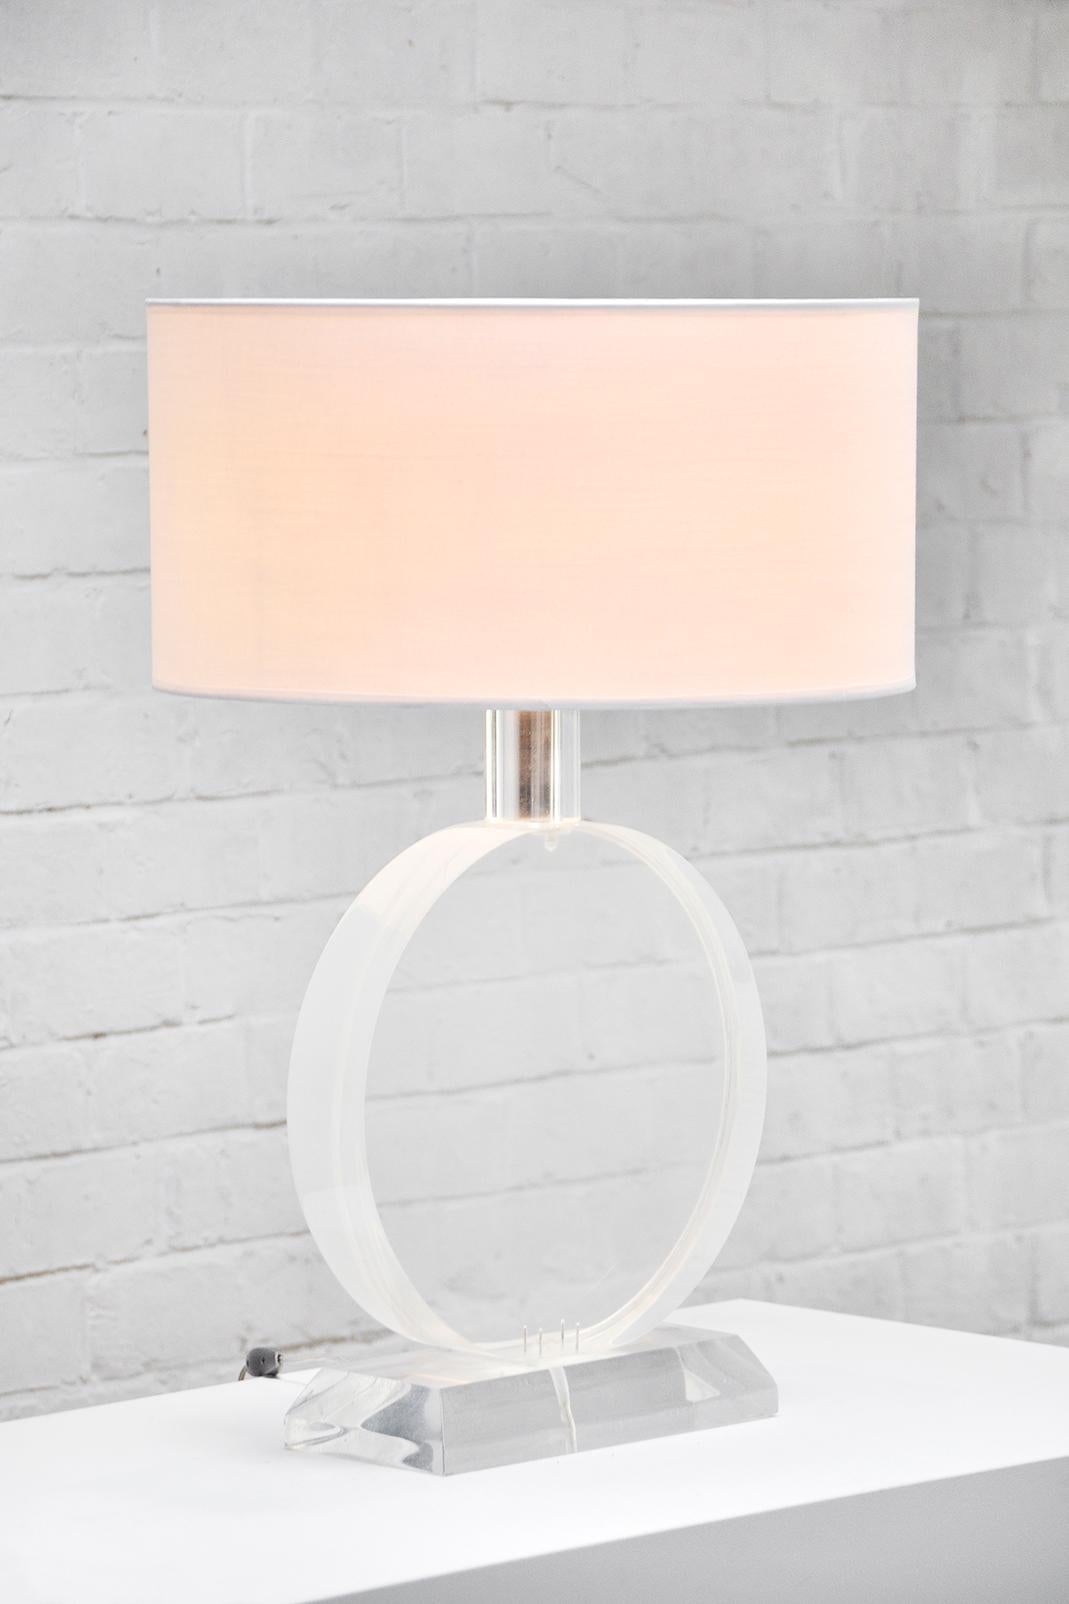 Unique sculptural and large Karl Springer style desk or table lamp made of solid heavy lucite. The lamp body is circle shaped and sitting on top of a chunky rectangular lucite base. Topped with a white cotton shade. Very good vintage condition,